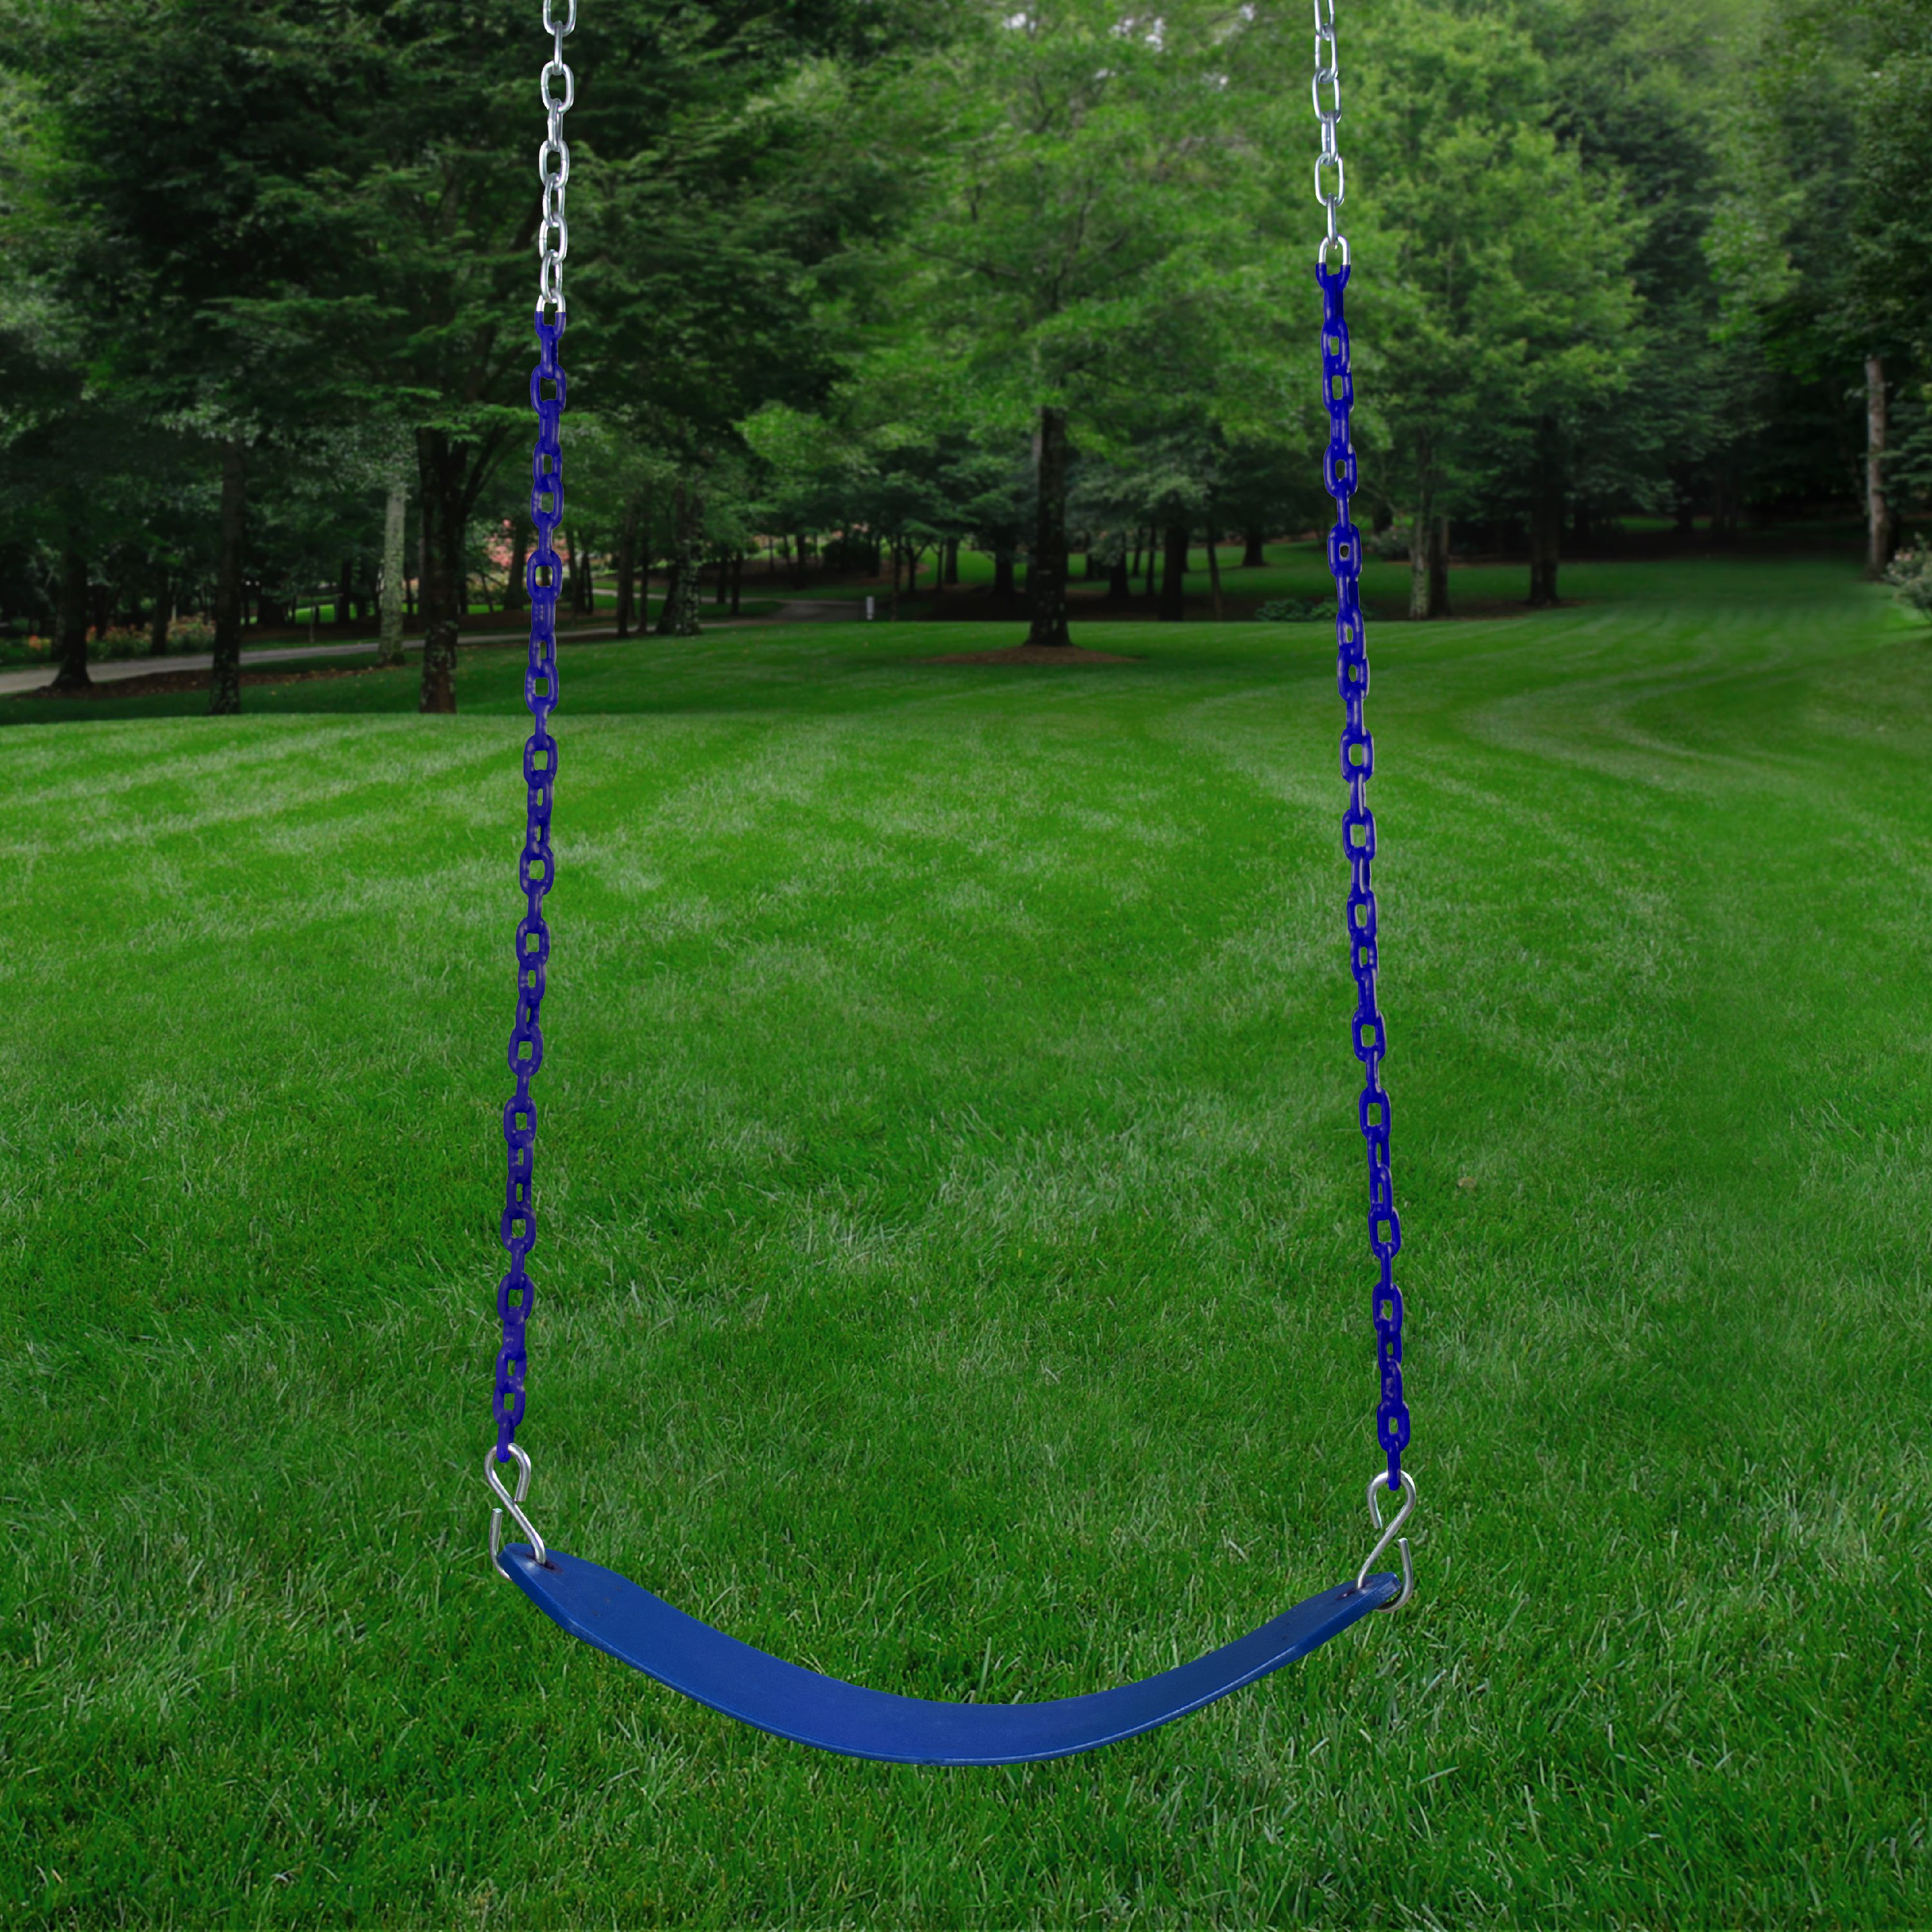 Gorilla Playsets Deluxe Swing Belt - Blue with Blue Chains - image 2 of 5